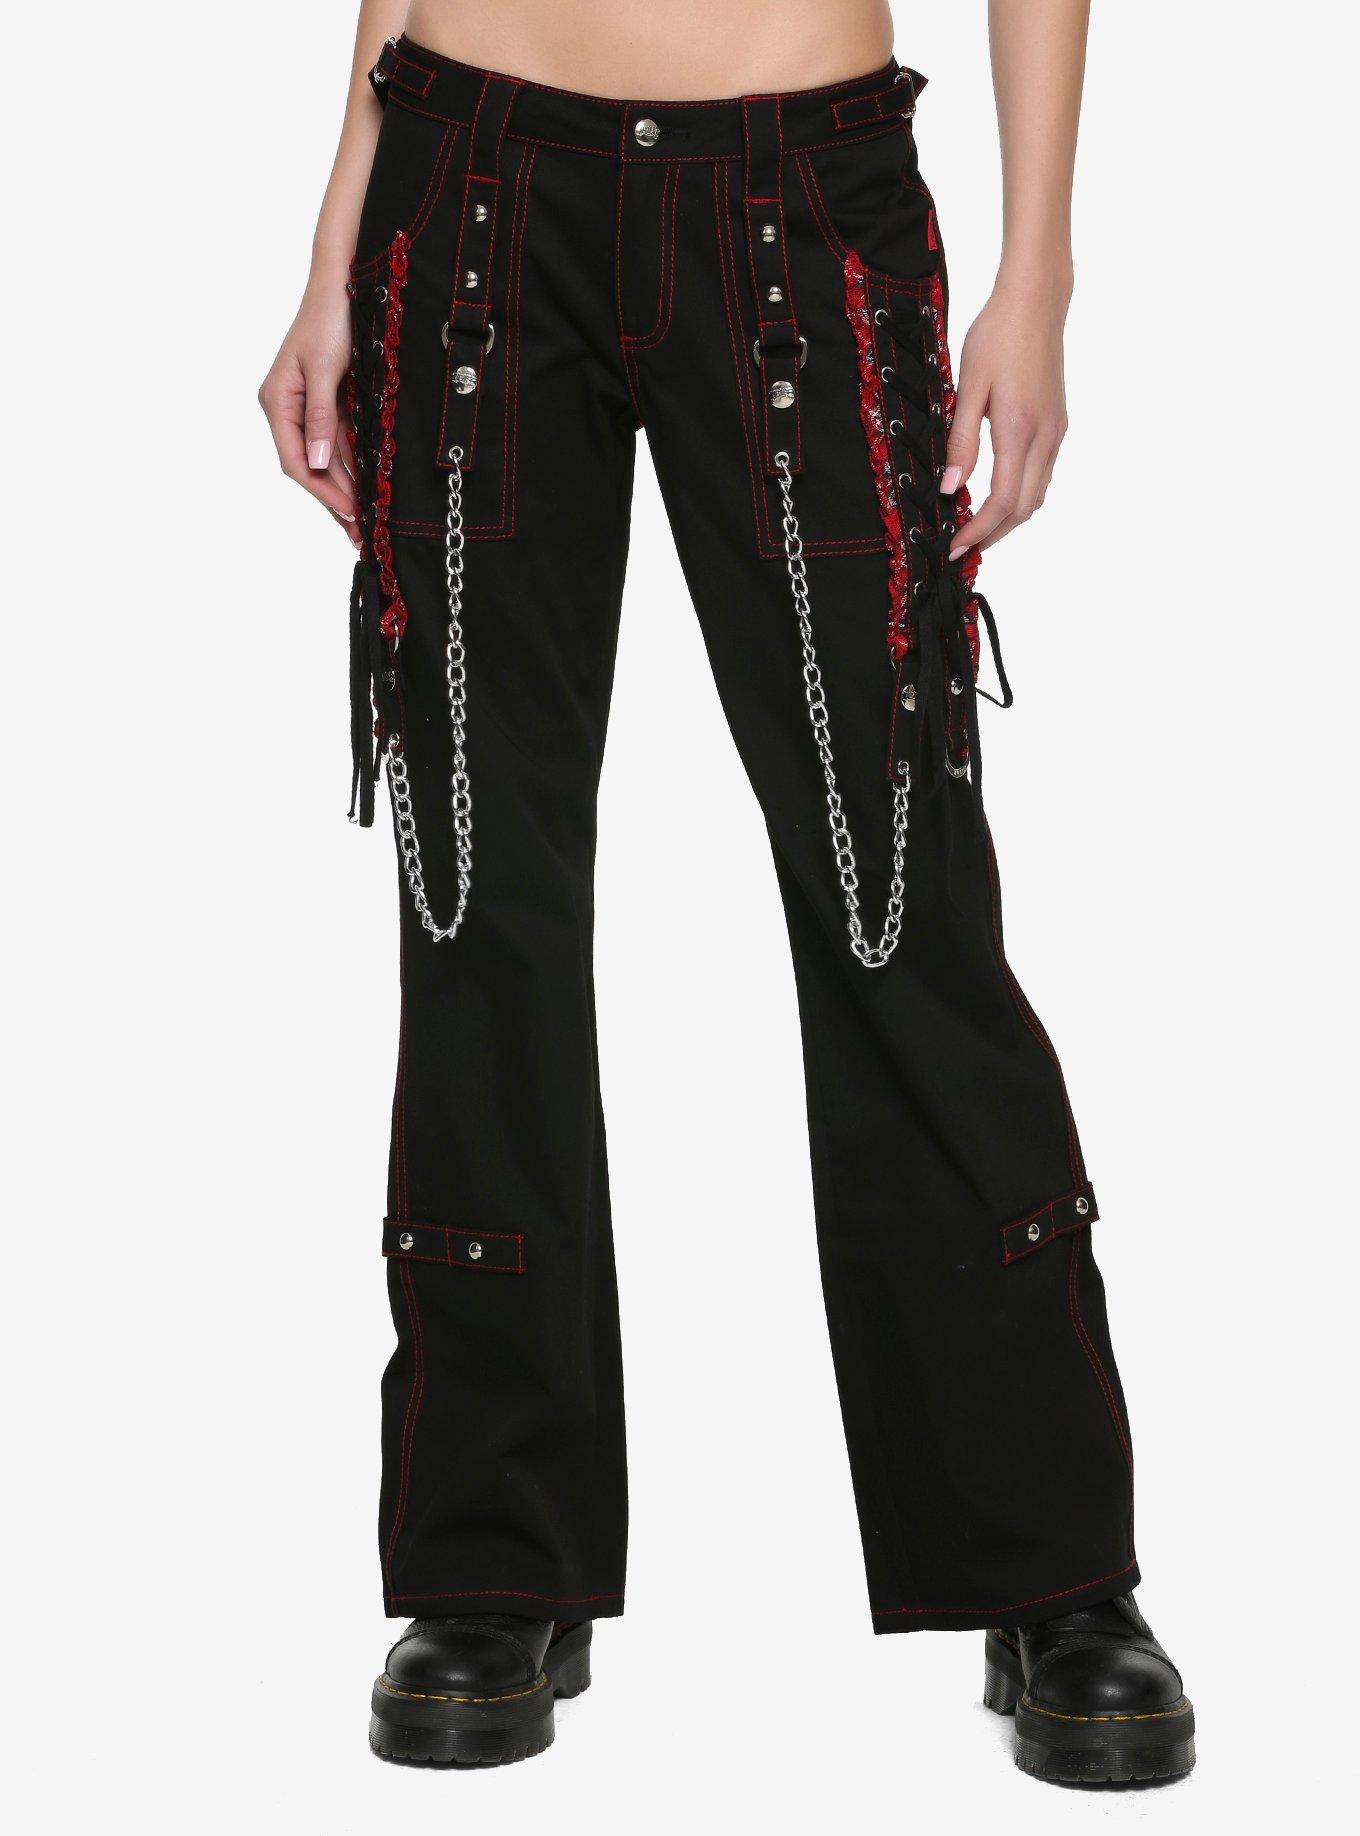 Tripp Black And Red Lace-Up Chain Pants